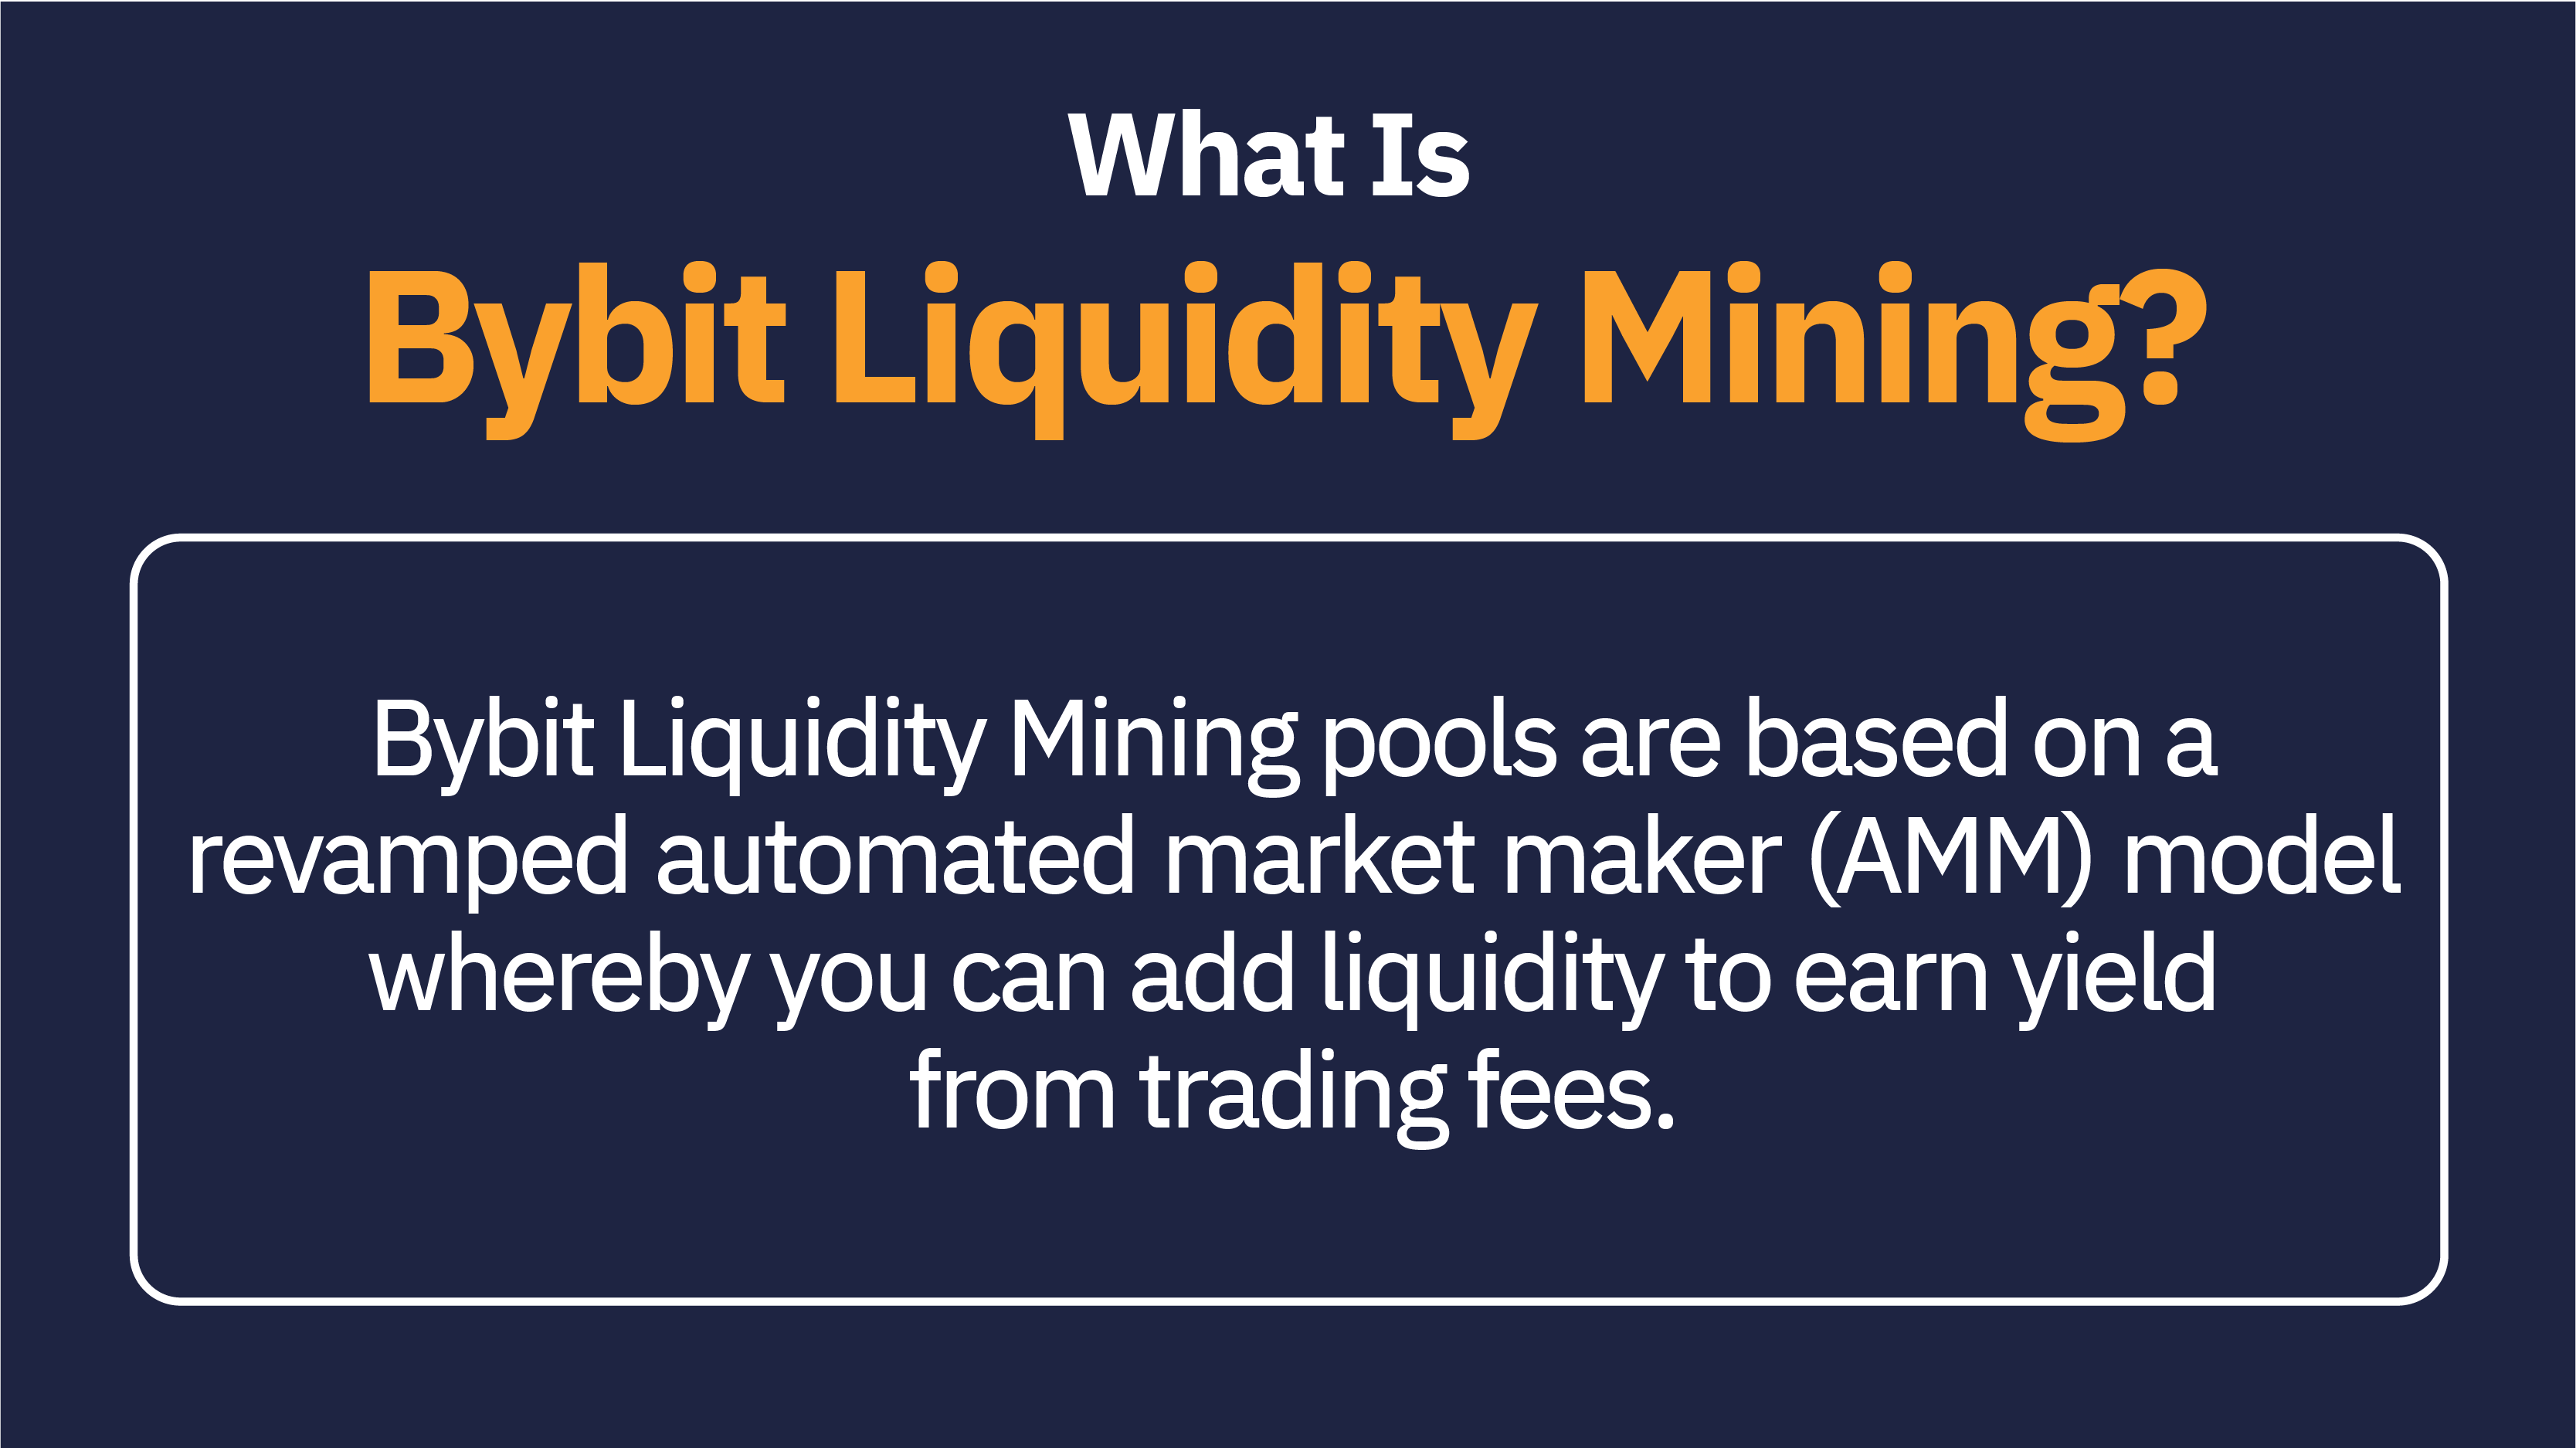 Bybit Liquidity Mining pools are based on a revamped automated market maker (AMM) model whereby you can add liquidity to earn yield from trading fees.